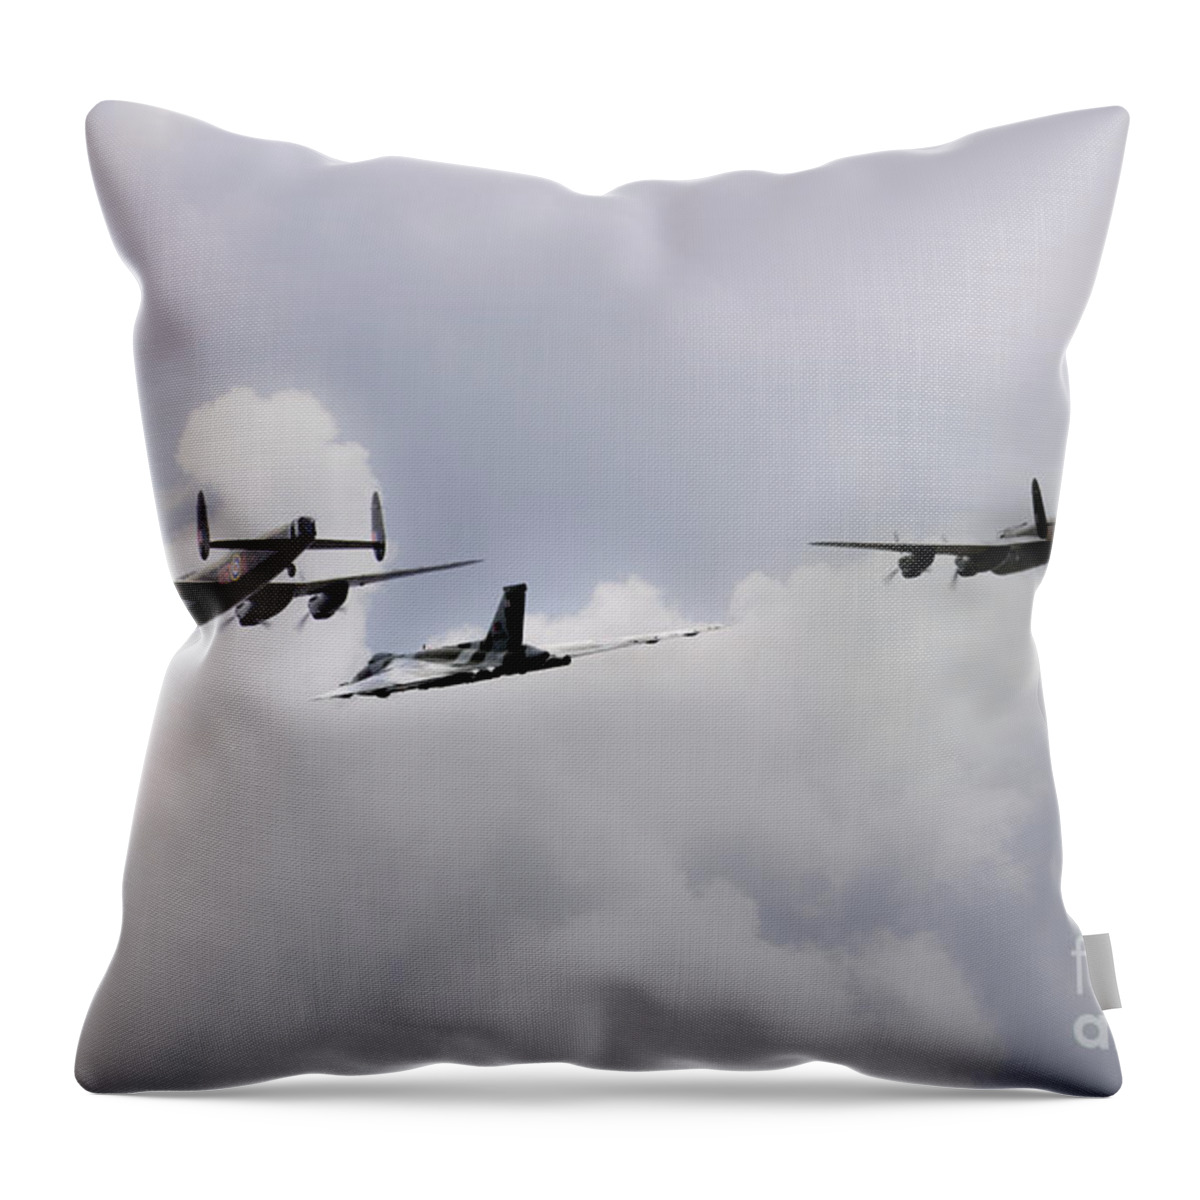 Avro Throw Pillow featuring the digital art 3 Sisters by Airpower Art